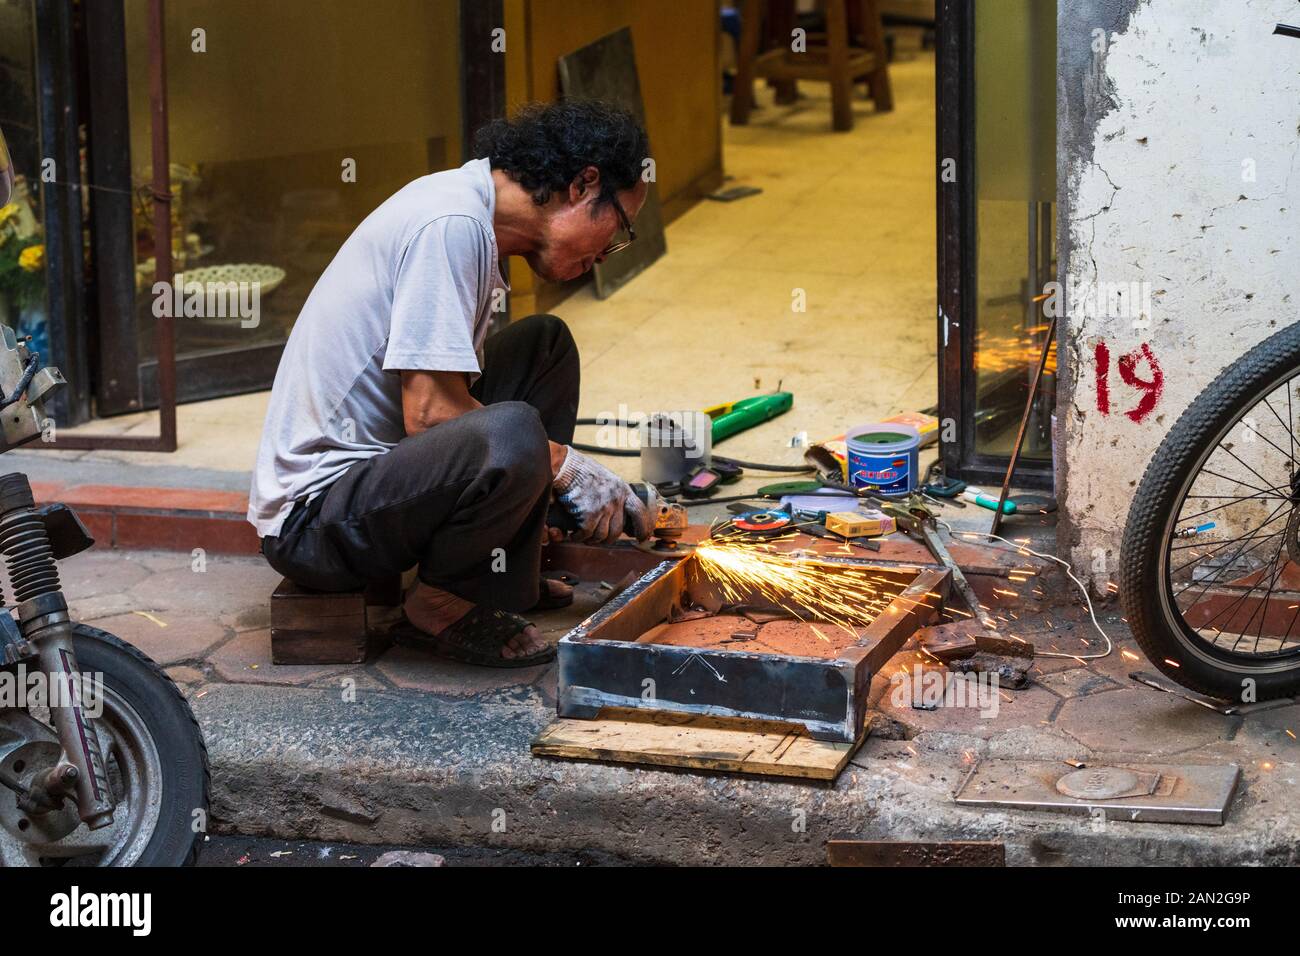 Hanoi, Vietnam - 18th October 2019: An old asian man repairs some metal on the street without any safety clothing or goggles Stock Photo